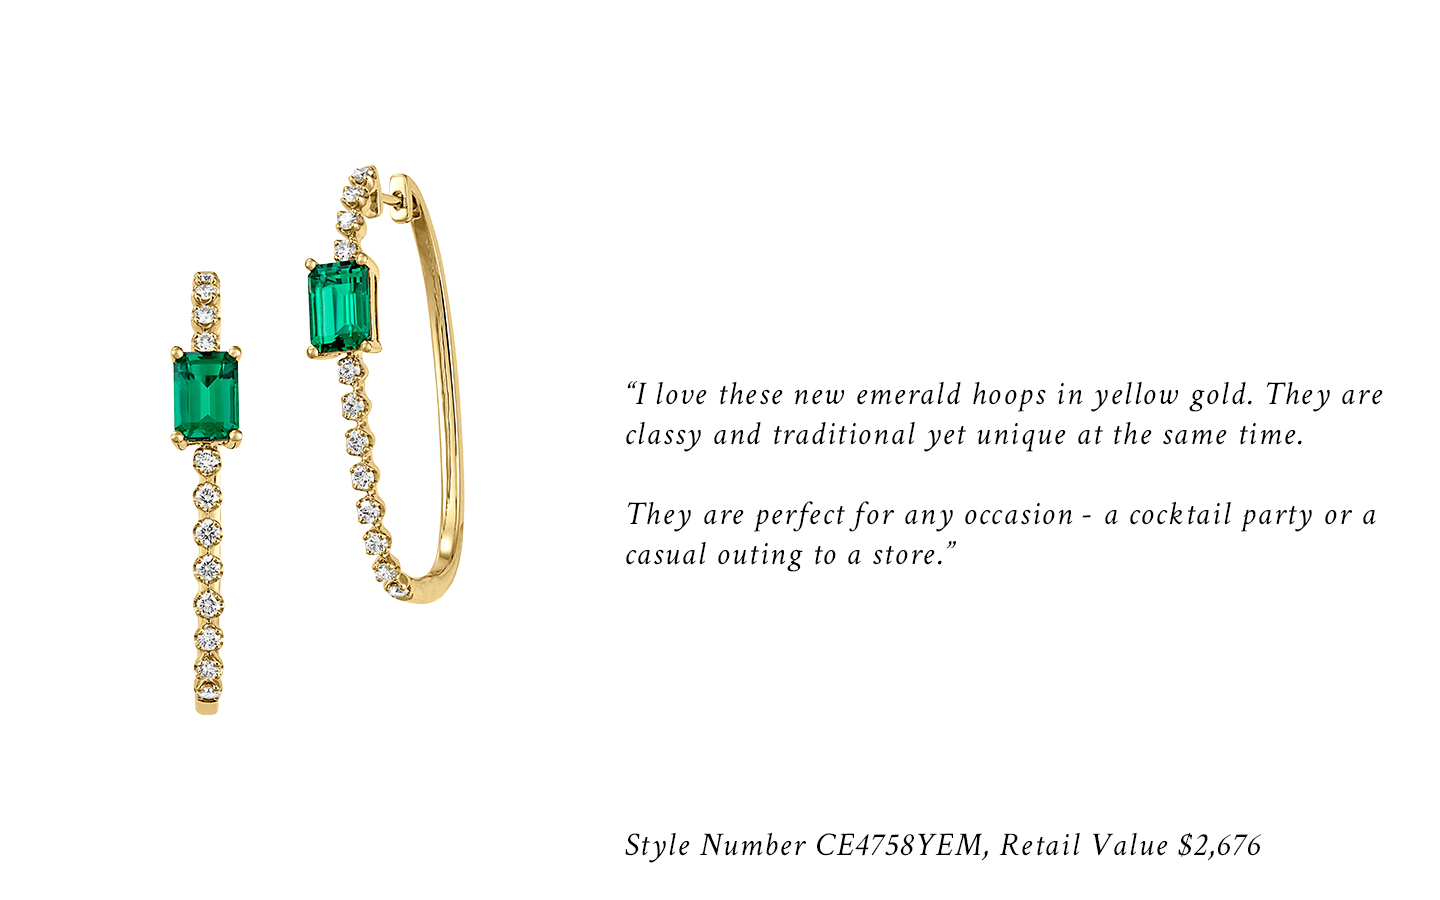 "I love these new emerald hoops in yellow gold. They are classy and traditional yet unique at the same time. They are perfect for any occasion - a cocktail party or a casual outing to a store." Style Number CE4758YEM, Retail Value $2,676